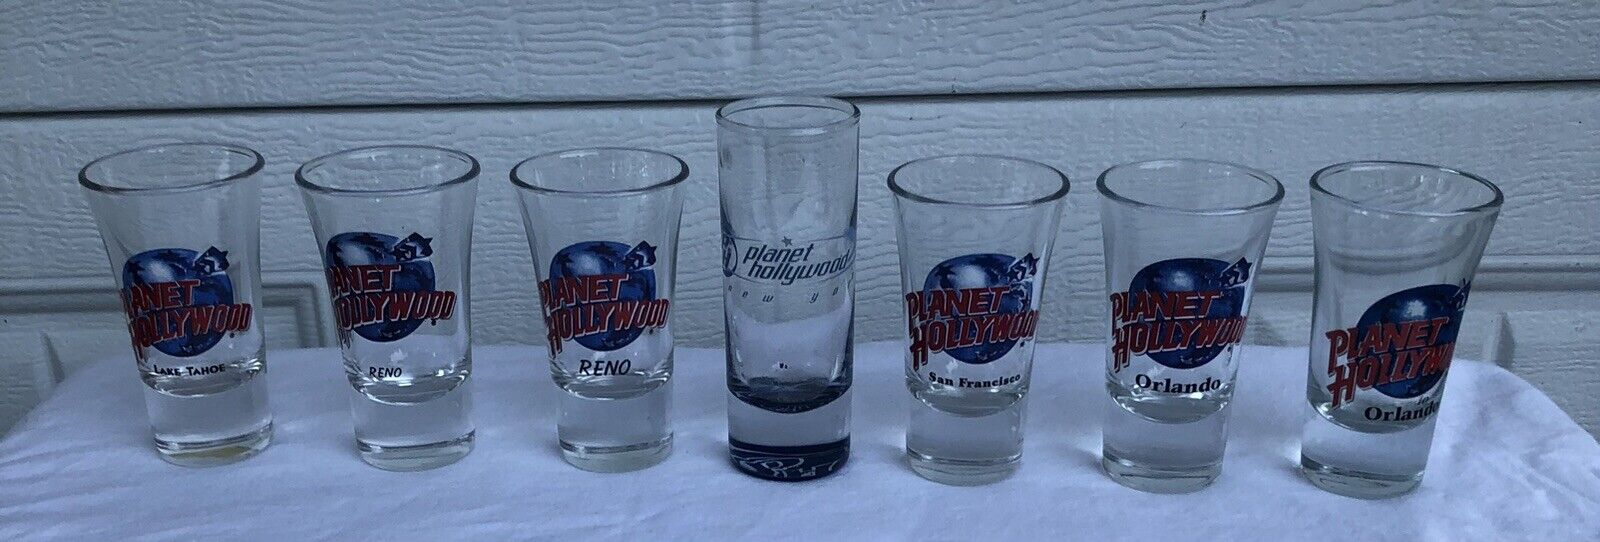 Lot of 7 Planet Hollywood Souvenir Shot Glasses 3.5 inch Flared Shooter Glass